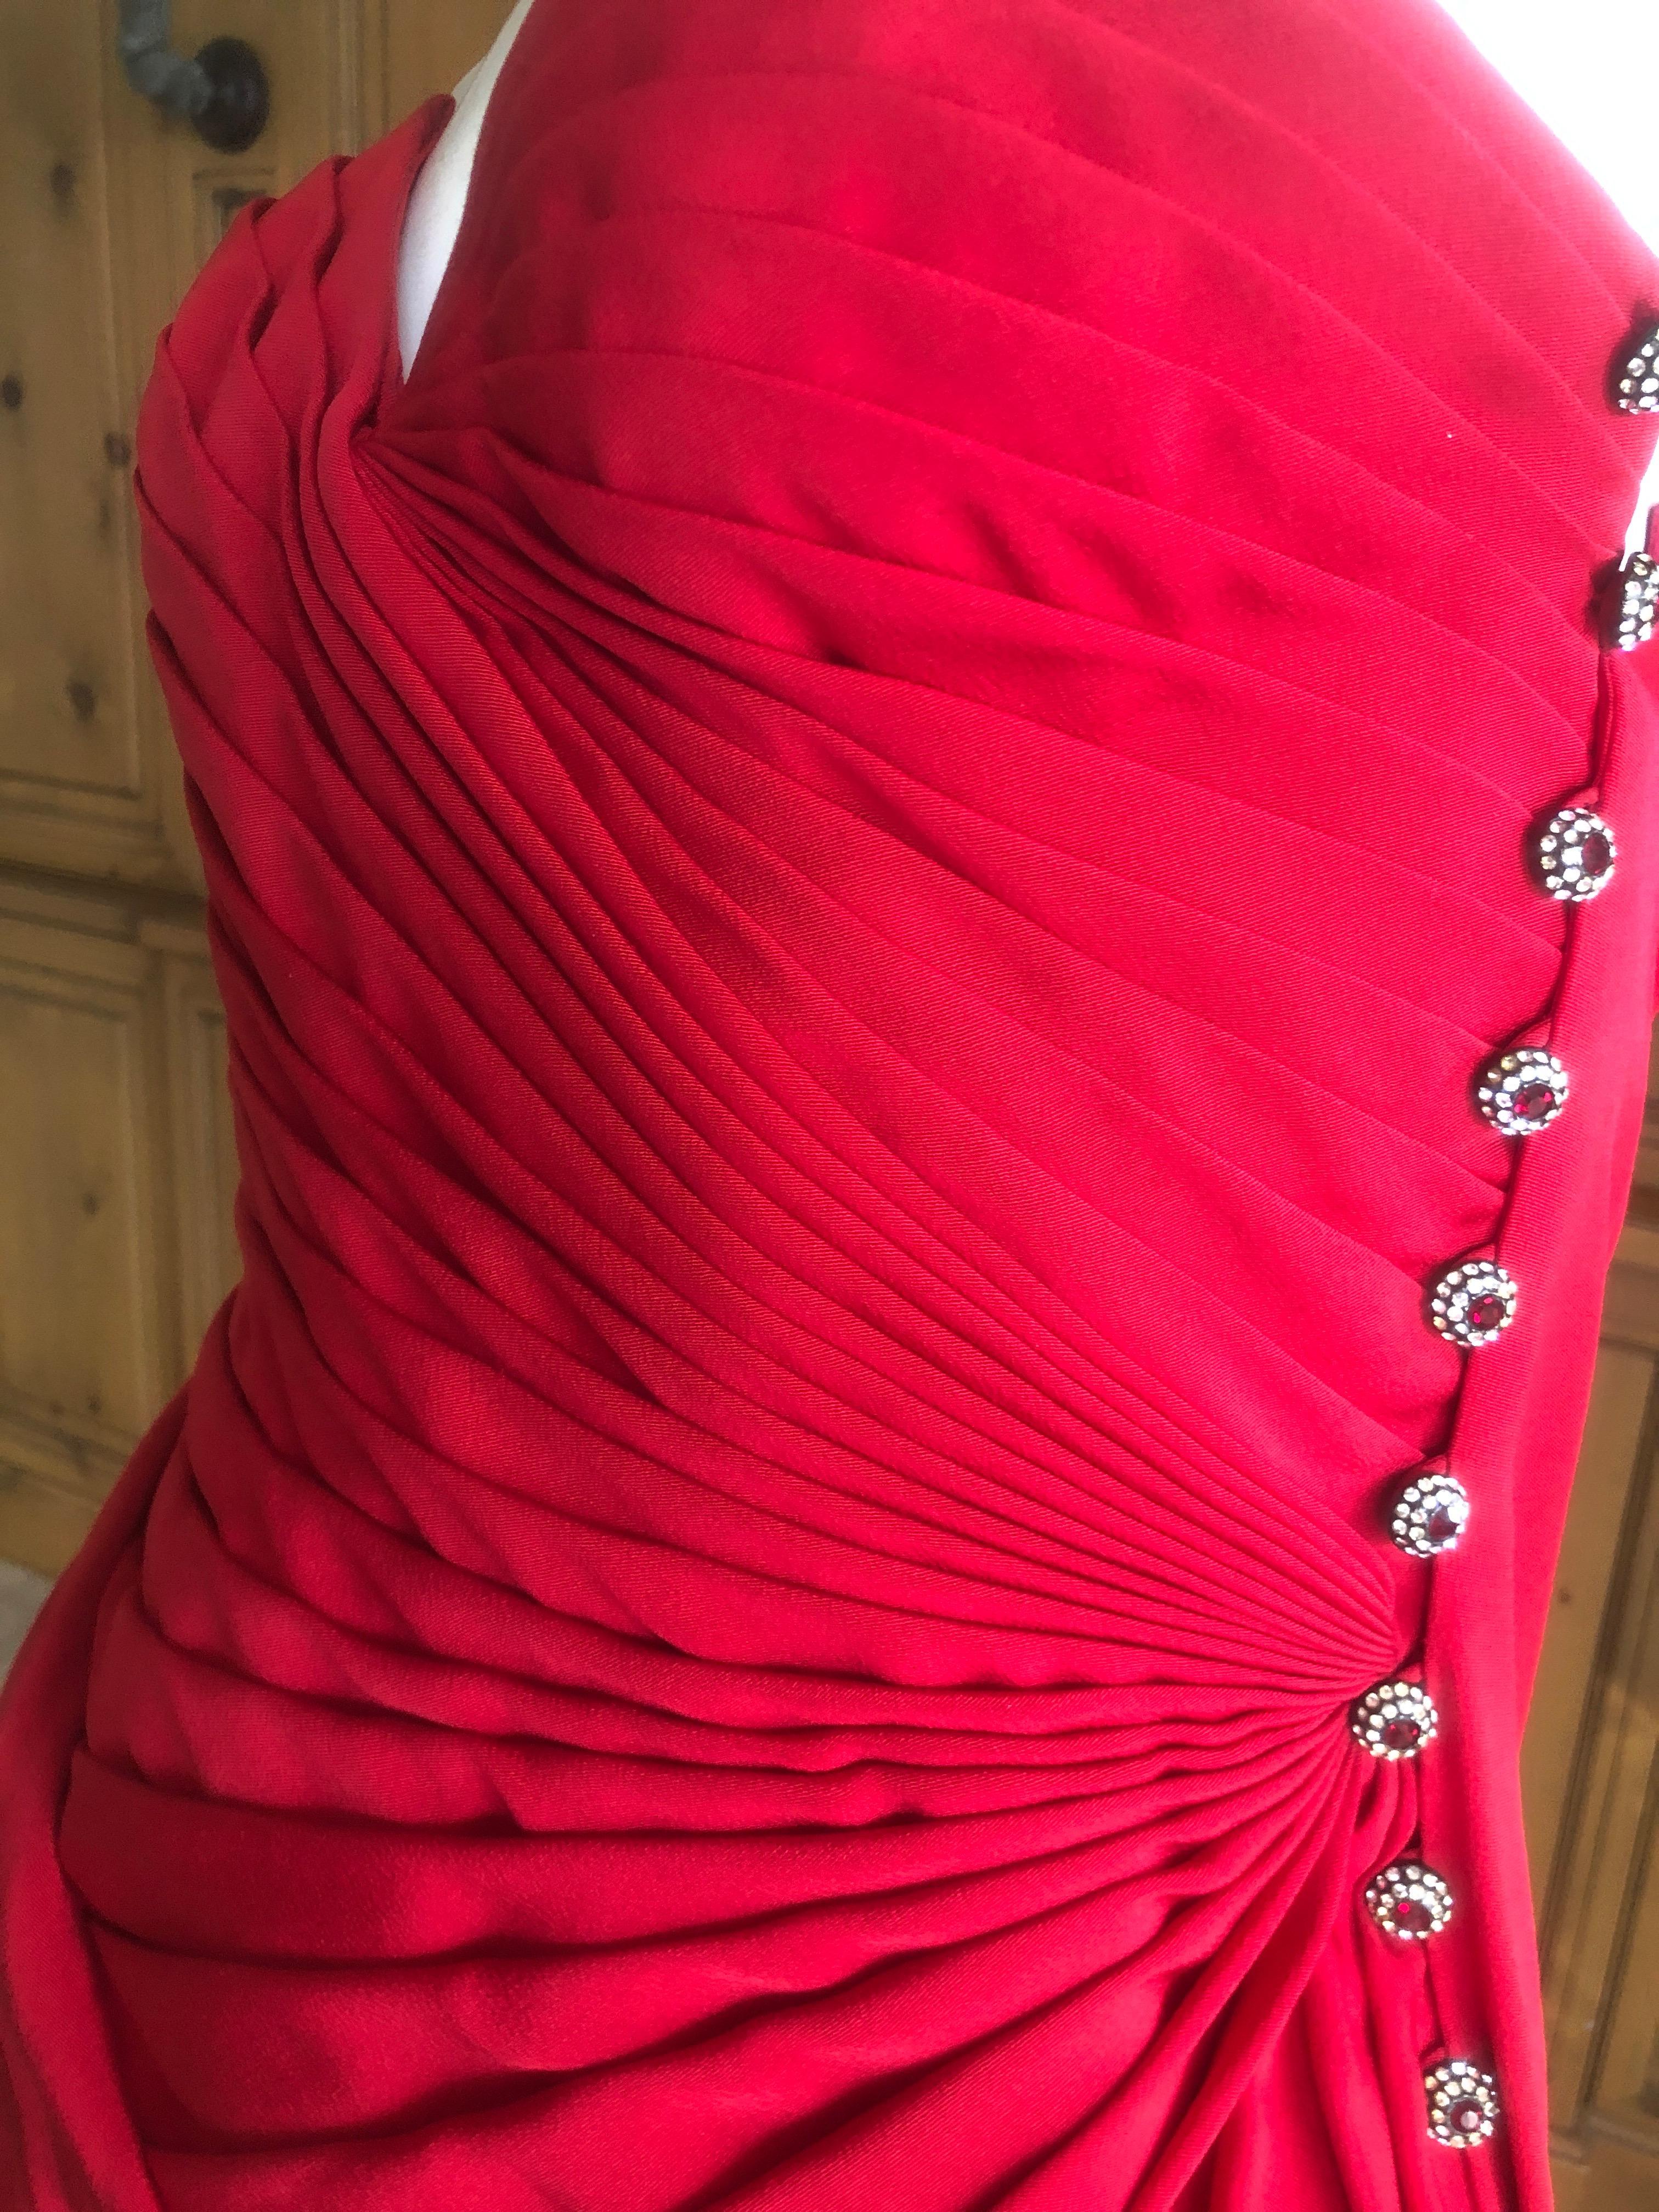 Emanuel Ungaro Numbered Haute Couture Fall 1984 Red  Strapless Evening Dress 6